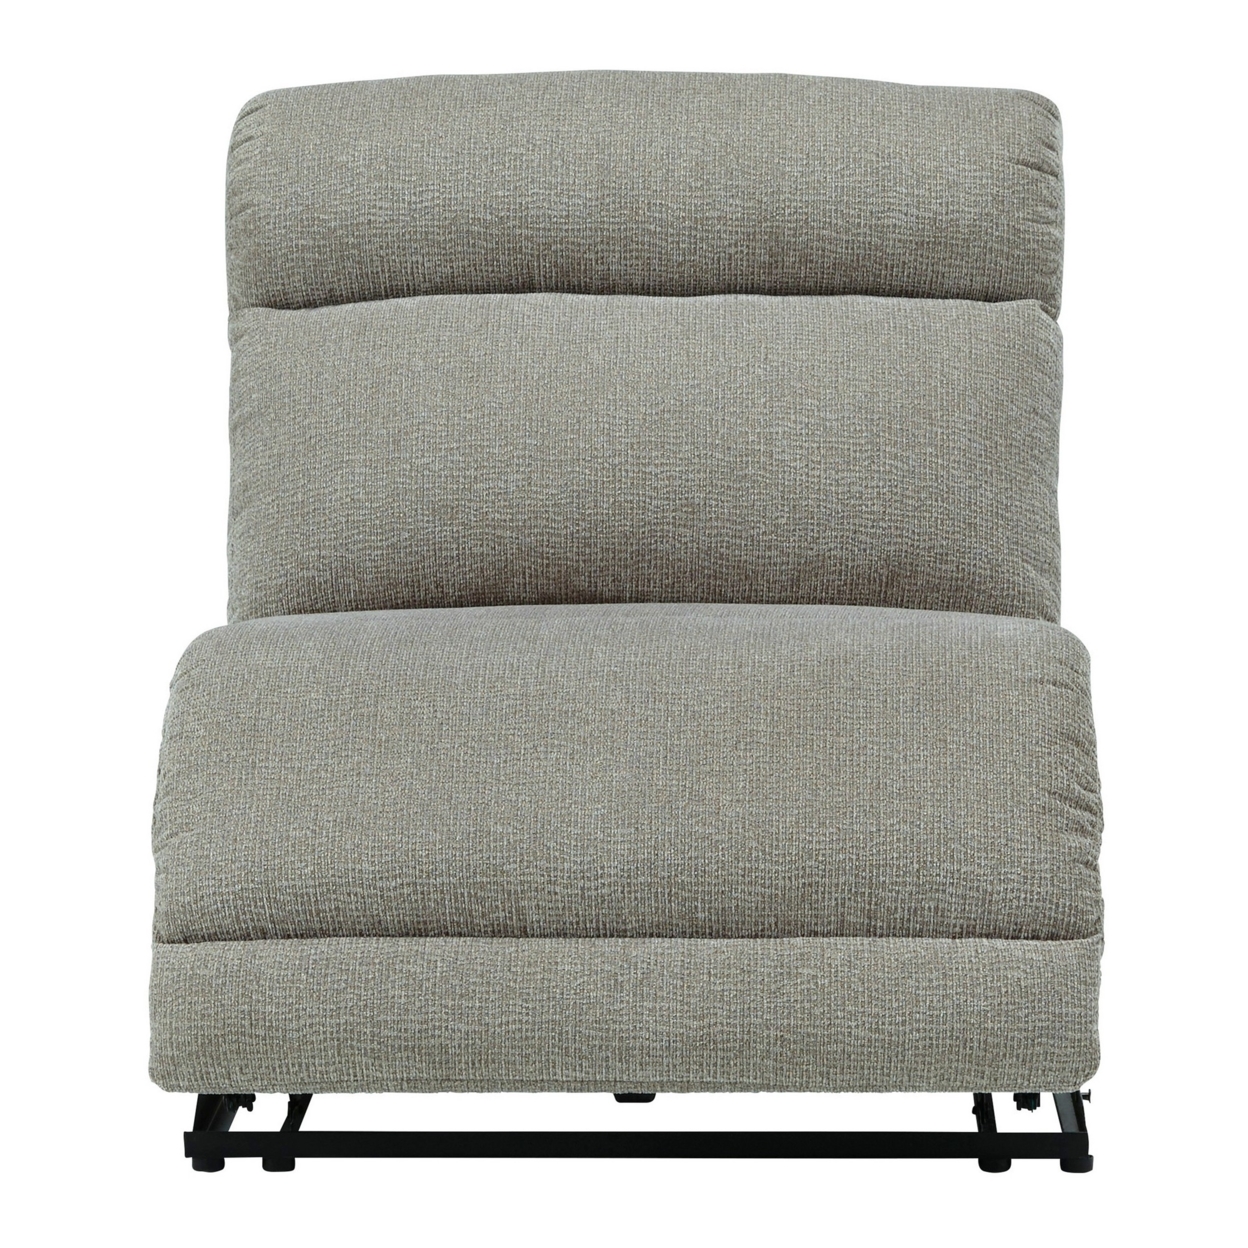 Power Armless Recliner With Fabric Upholster And Split Back, Gray- Saltoro Sherpi